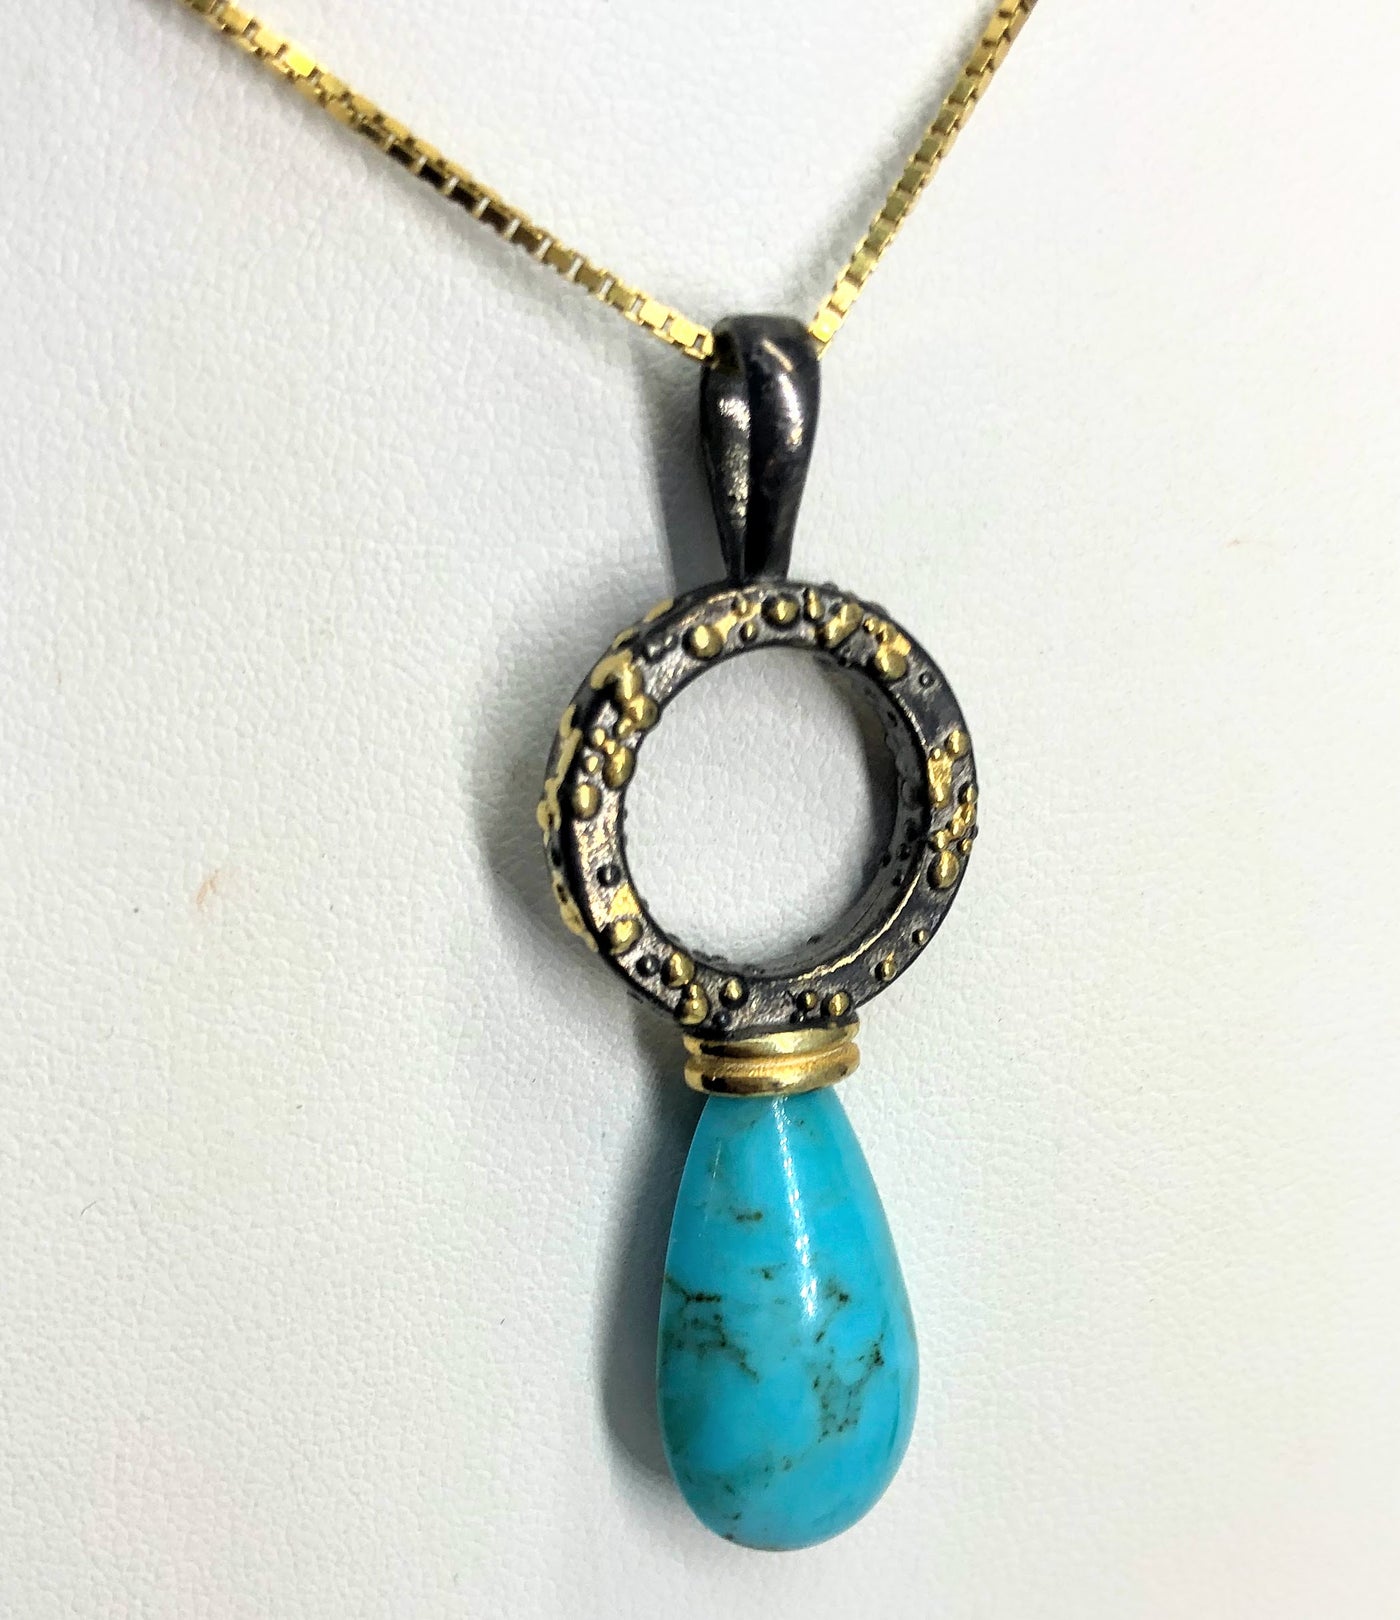 "Nuck-Nuck" Pendant Necklace - Turquoise, Oxidized Sterling, 18K Gold